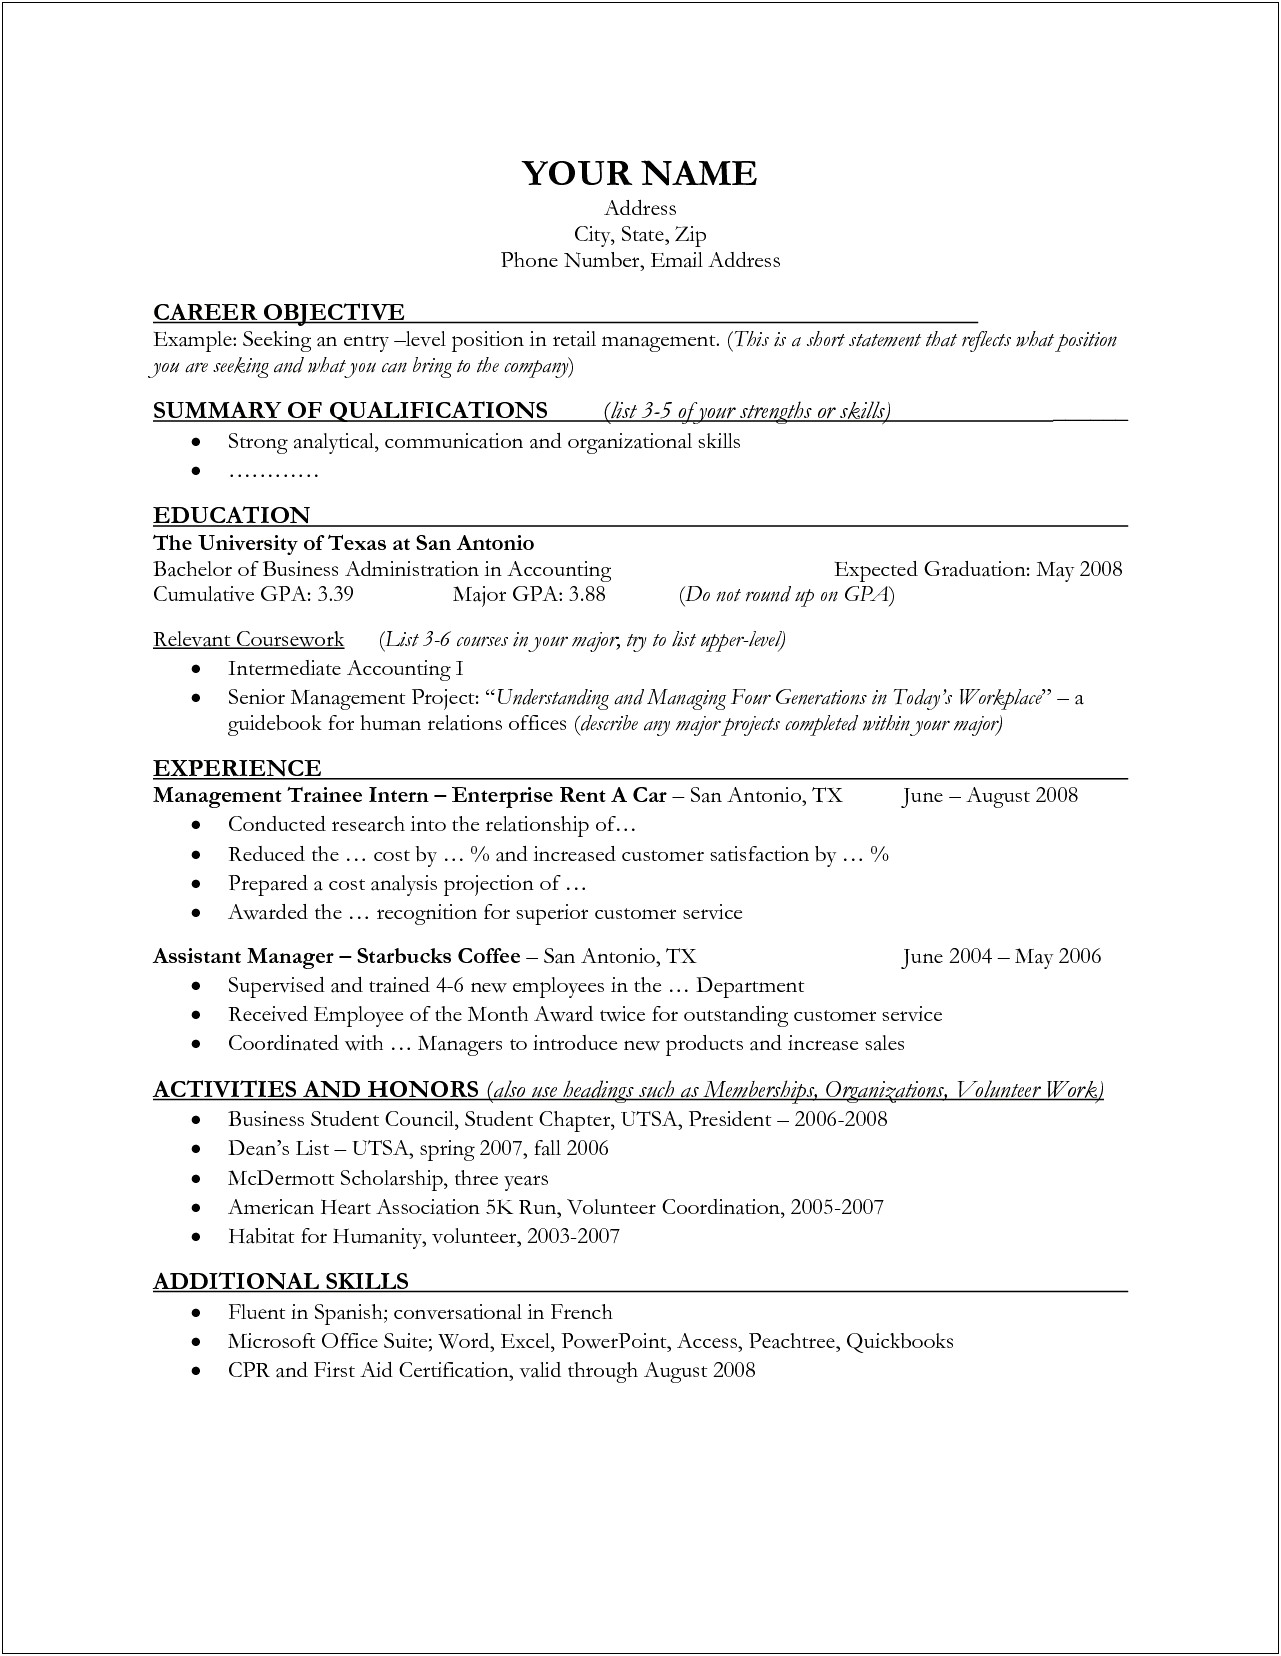 Resume Objective Sample For Sales